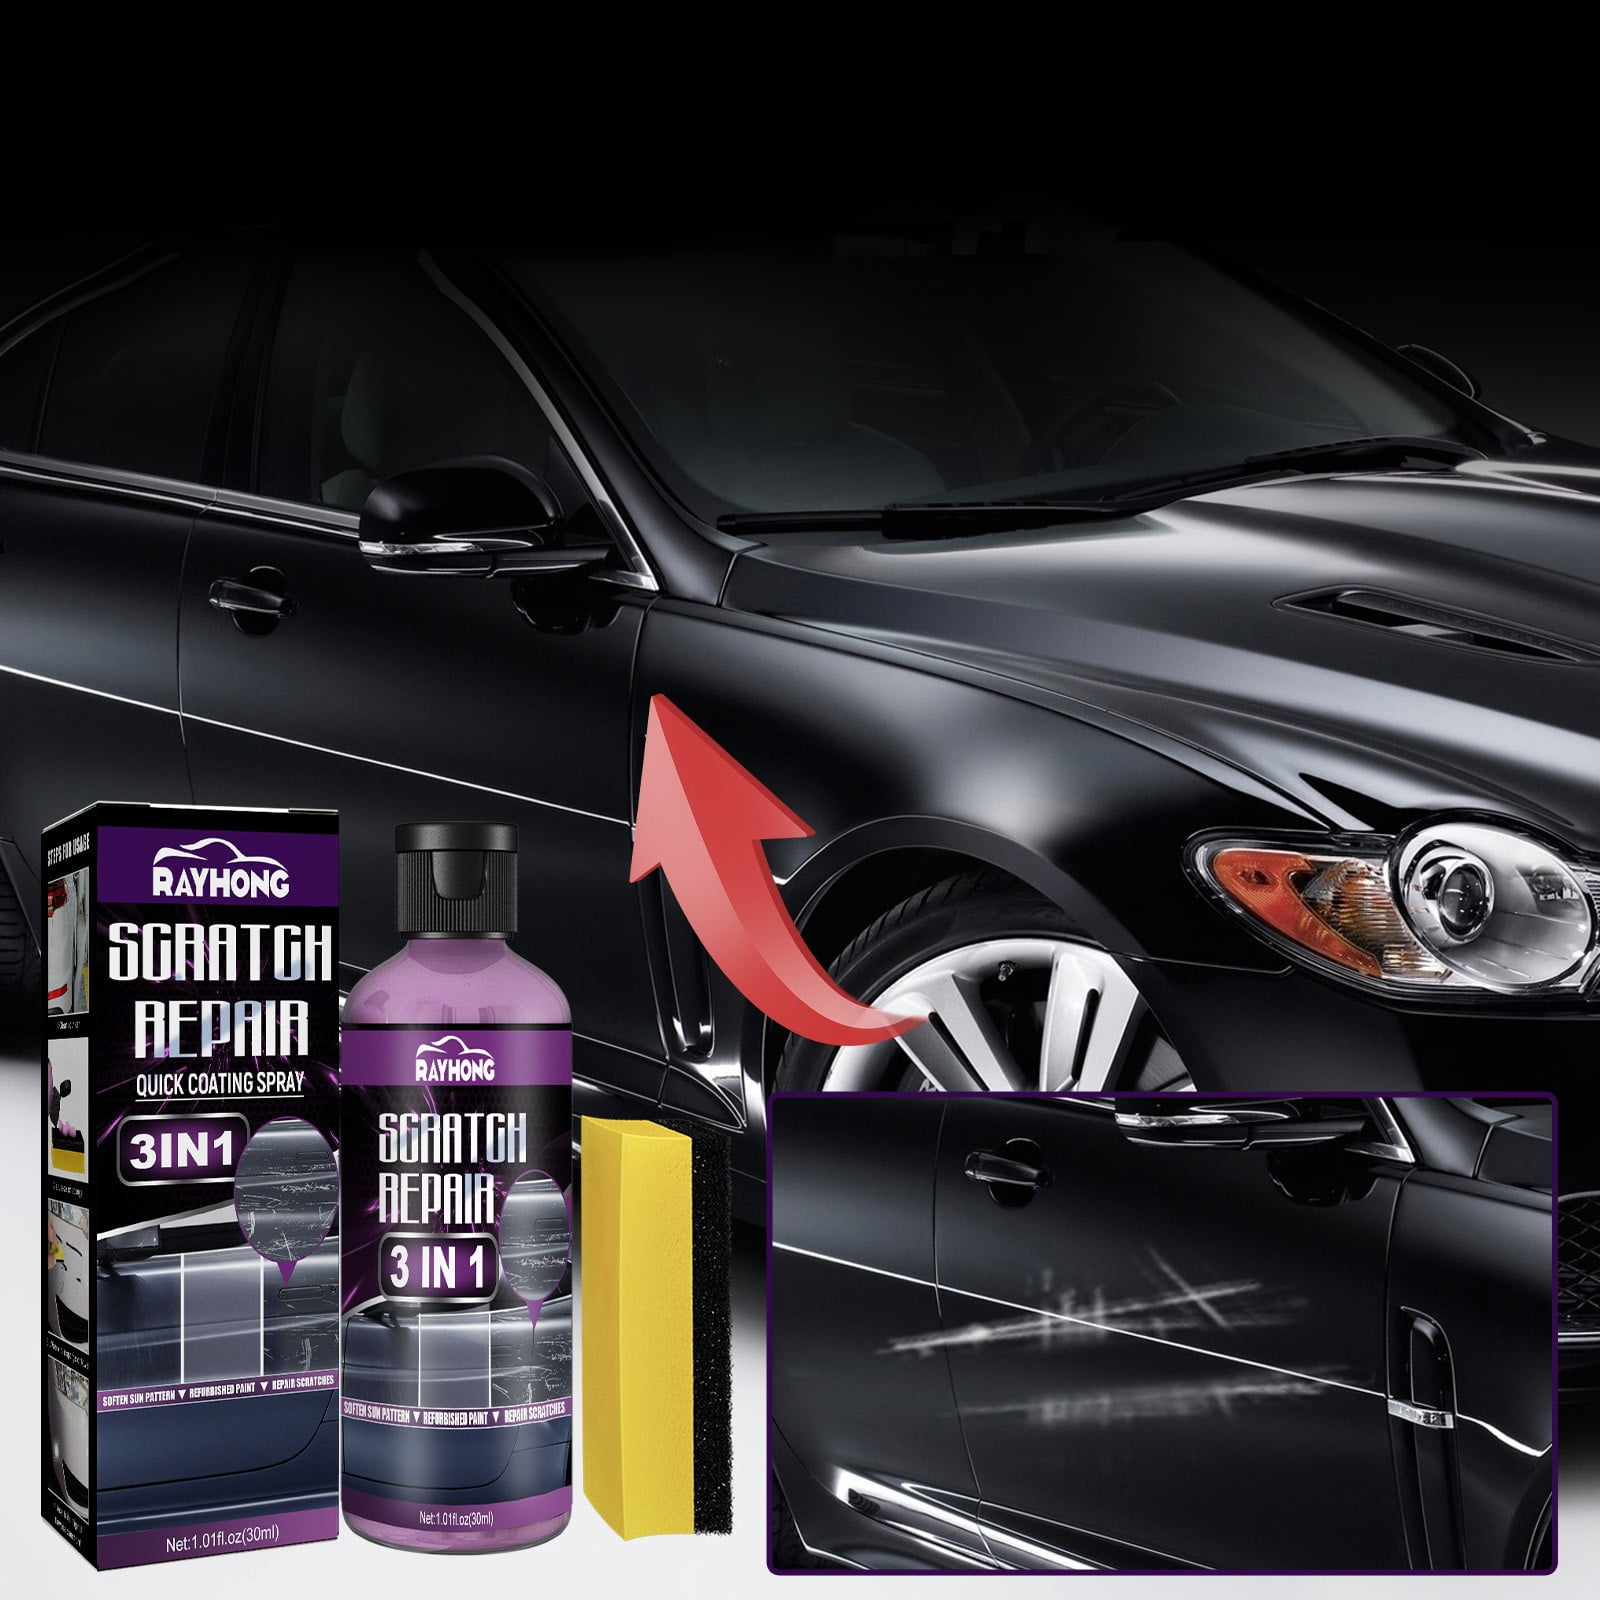 Scratch and Swirl Remover - Ultimate Car Scratch Remover - Polish & Paint Restorer - Easily Repair Paint Scratches, Scratches, Water Spots,2 Packs